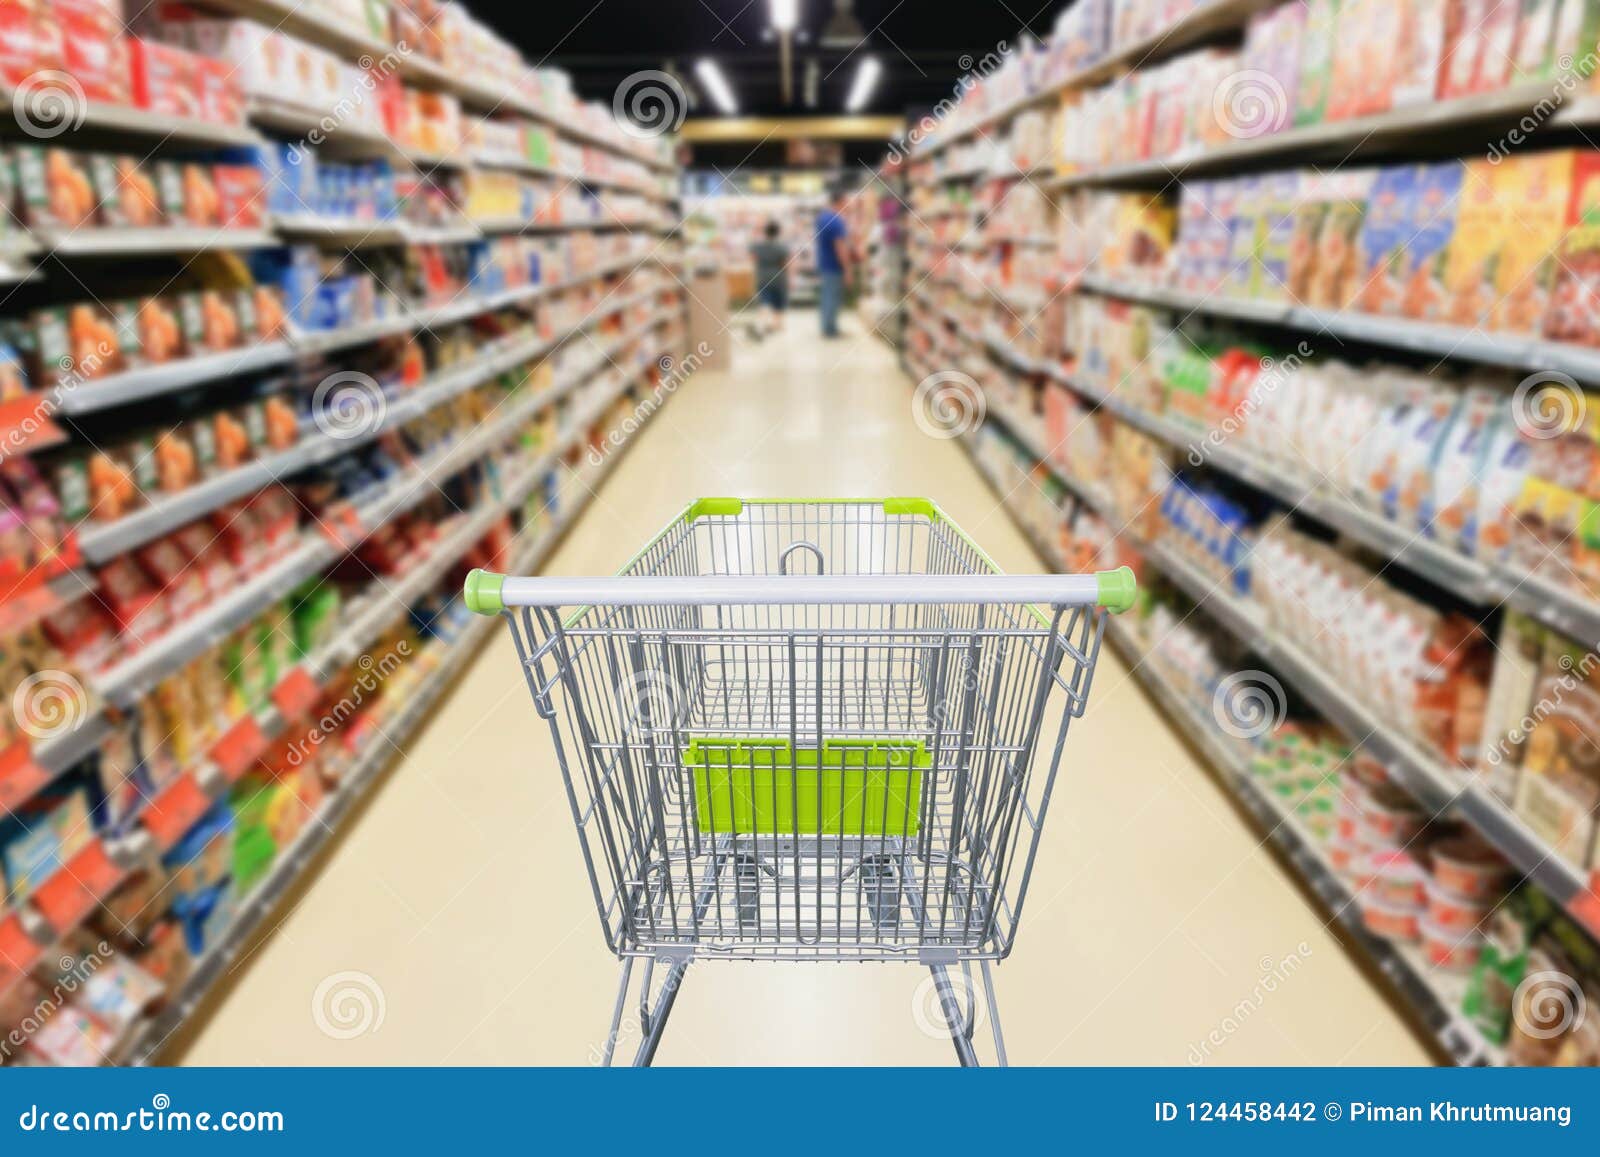 Supermarket Aisle With Empty Shopping Cart At Grocery Store Stock Photo